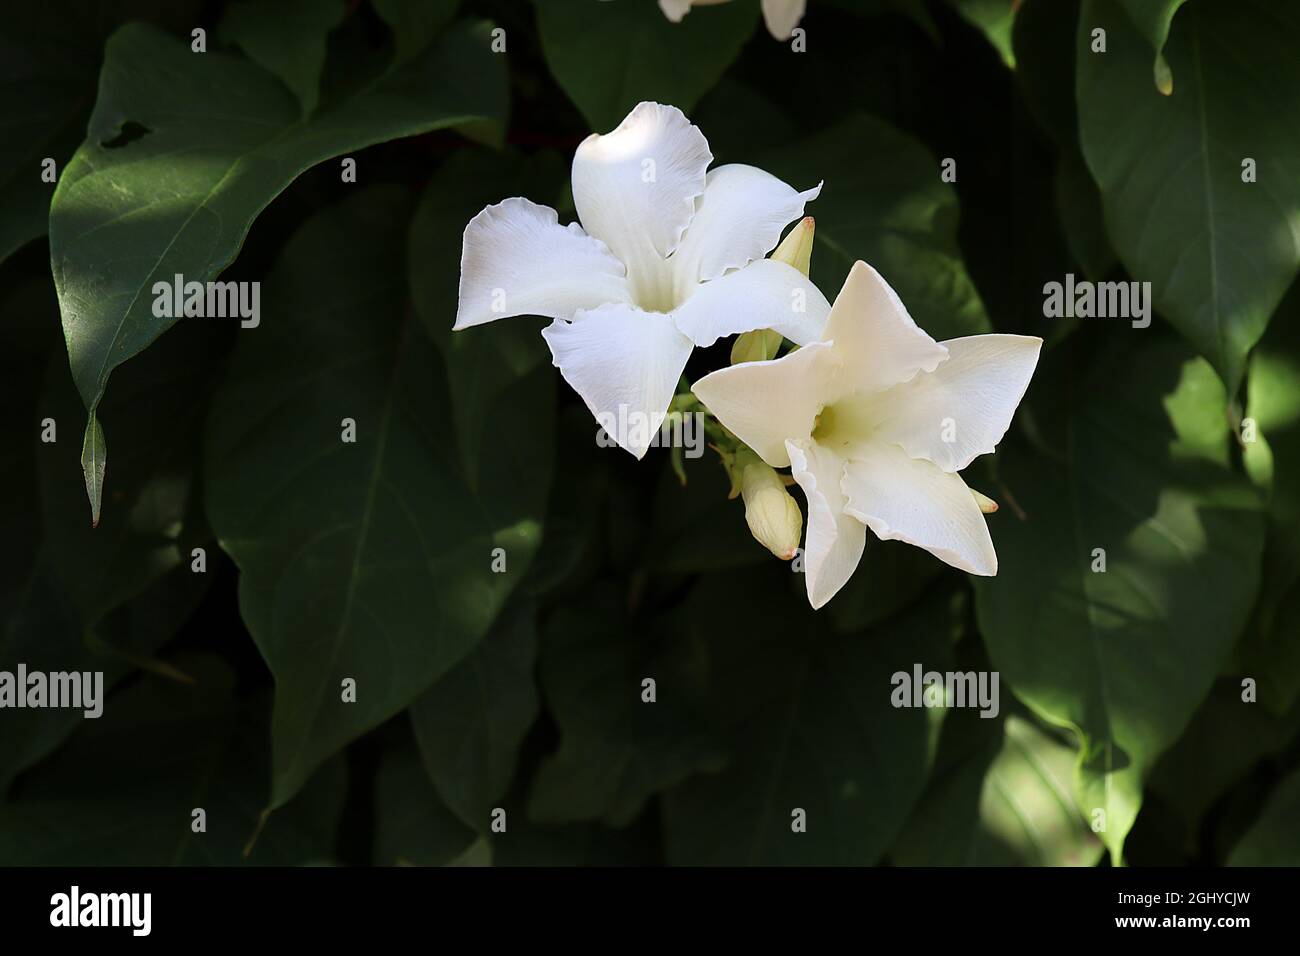 Mandevilla Iaxa  Chilean jasmine – white funnel-shaped flowers and pale green pointed flower buds,  August, England, UK Stock Photo